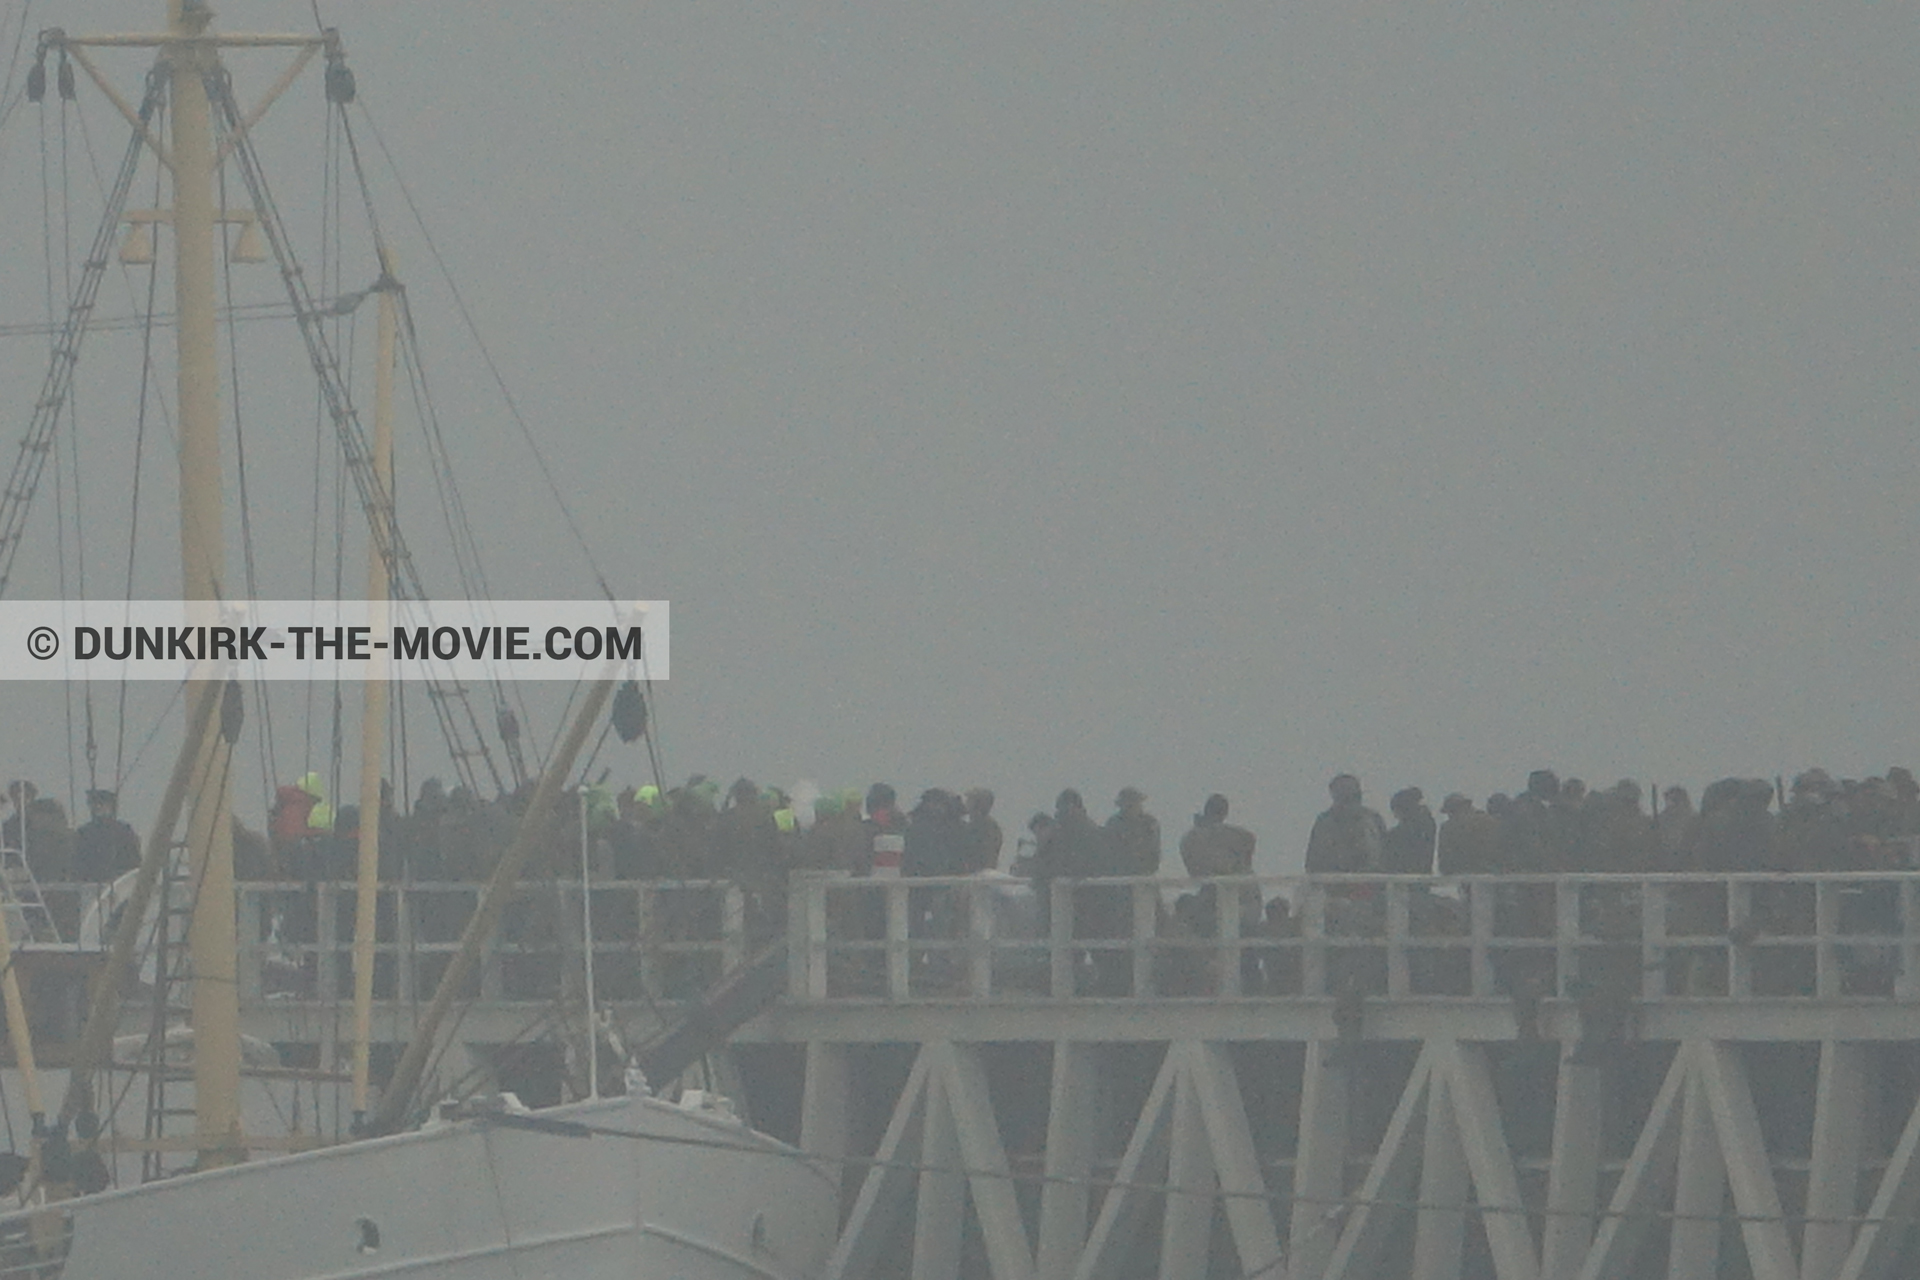 Picture with grey sky, supernumeraries, EST pier, M/S Rogaland,  from behind the scene of the Dunkirk movie by Nolan